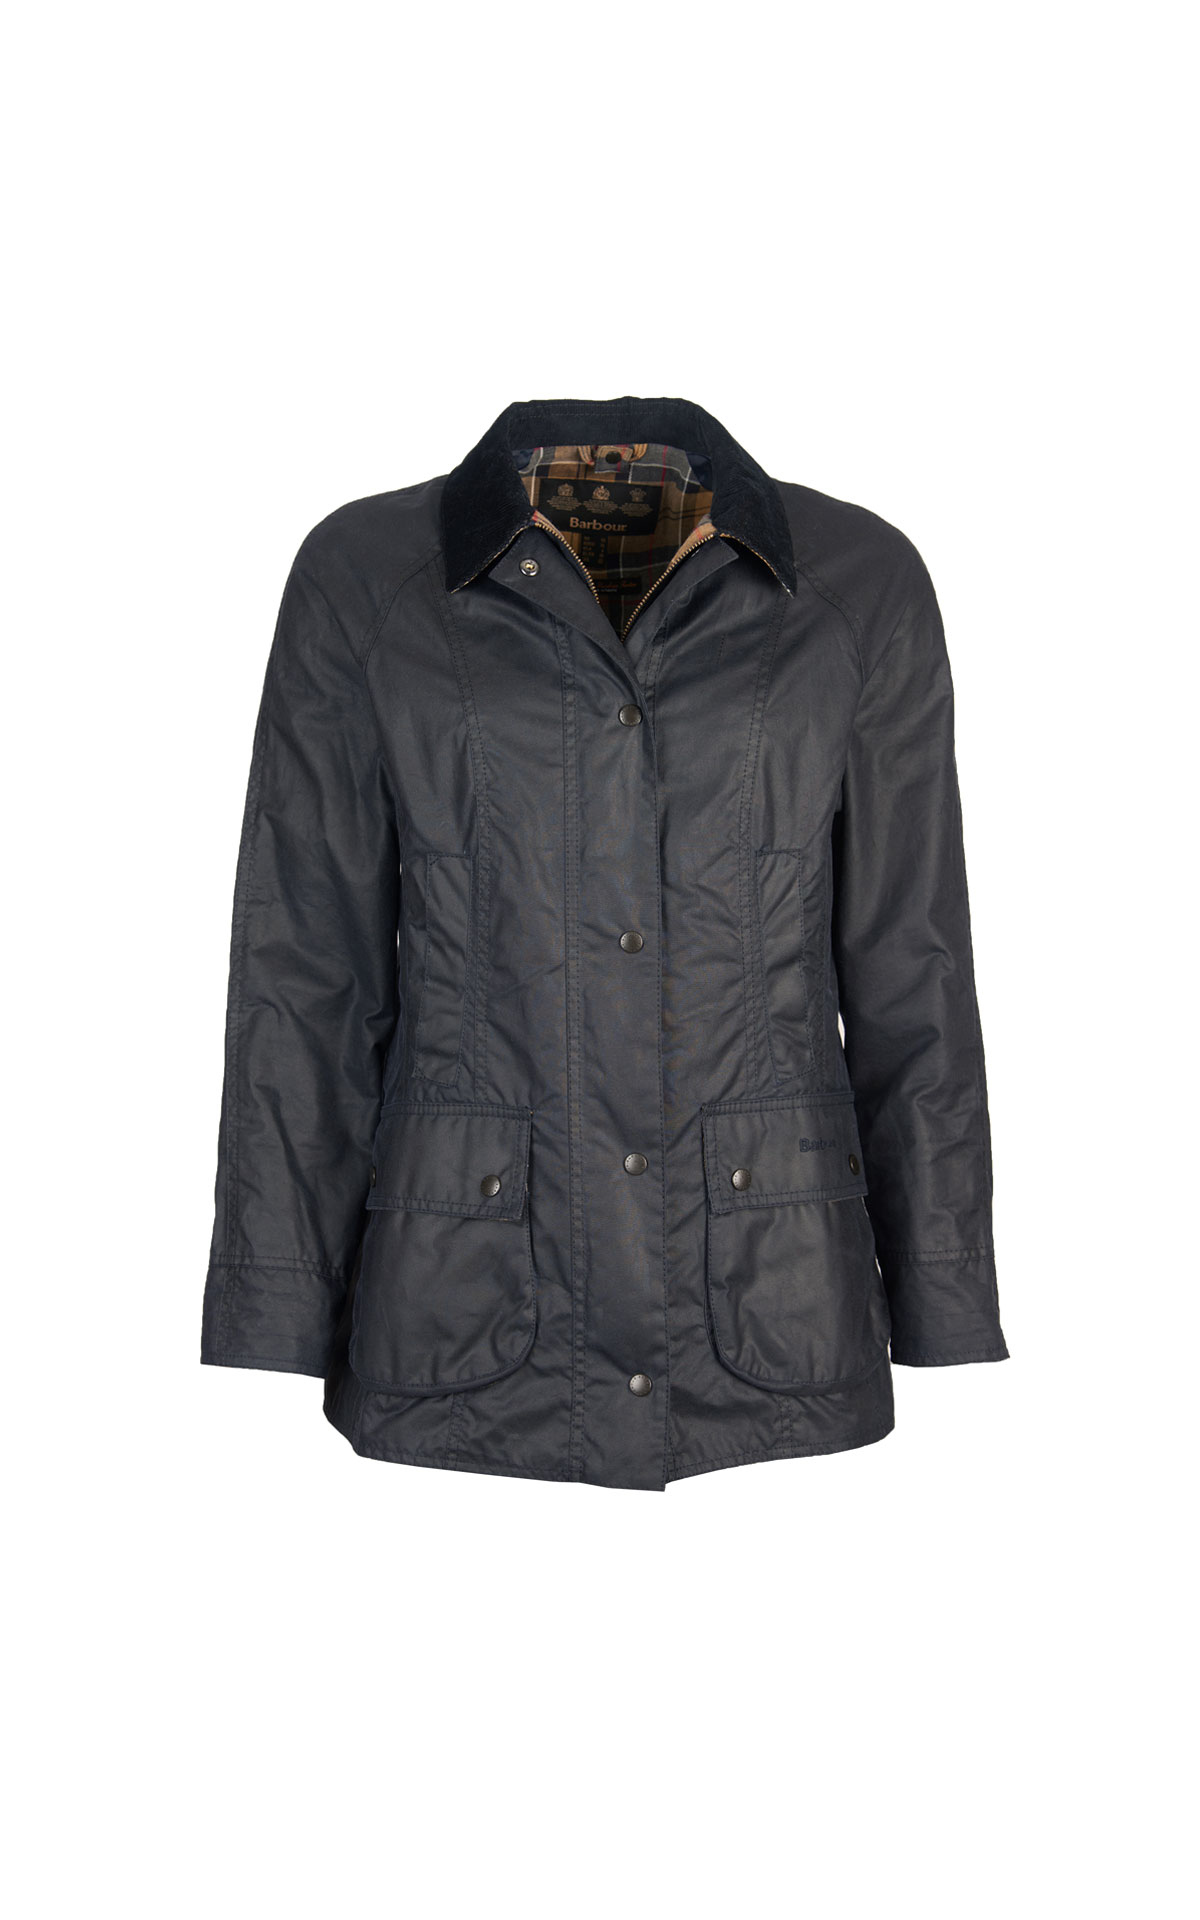 Barbour Beadnell wax jacket from Bicester Village